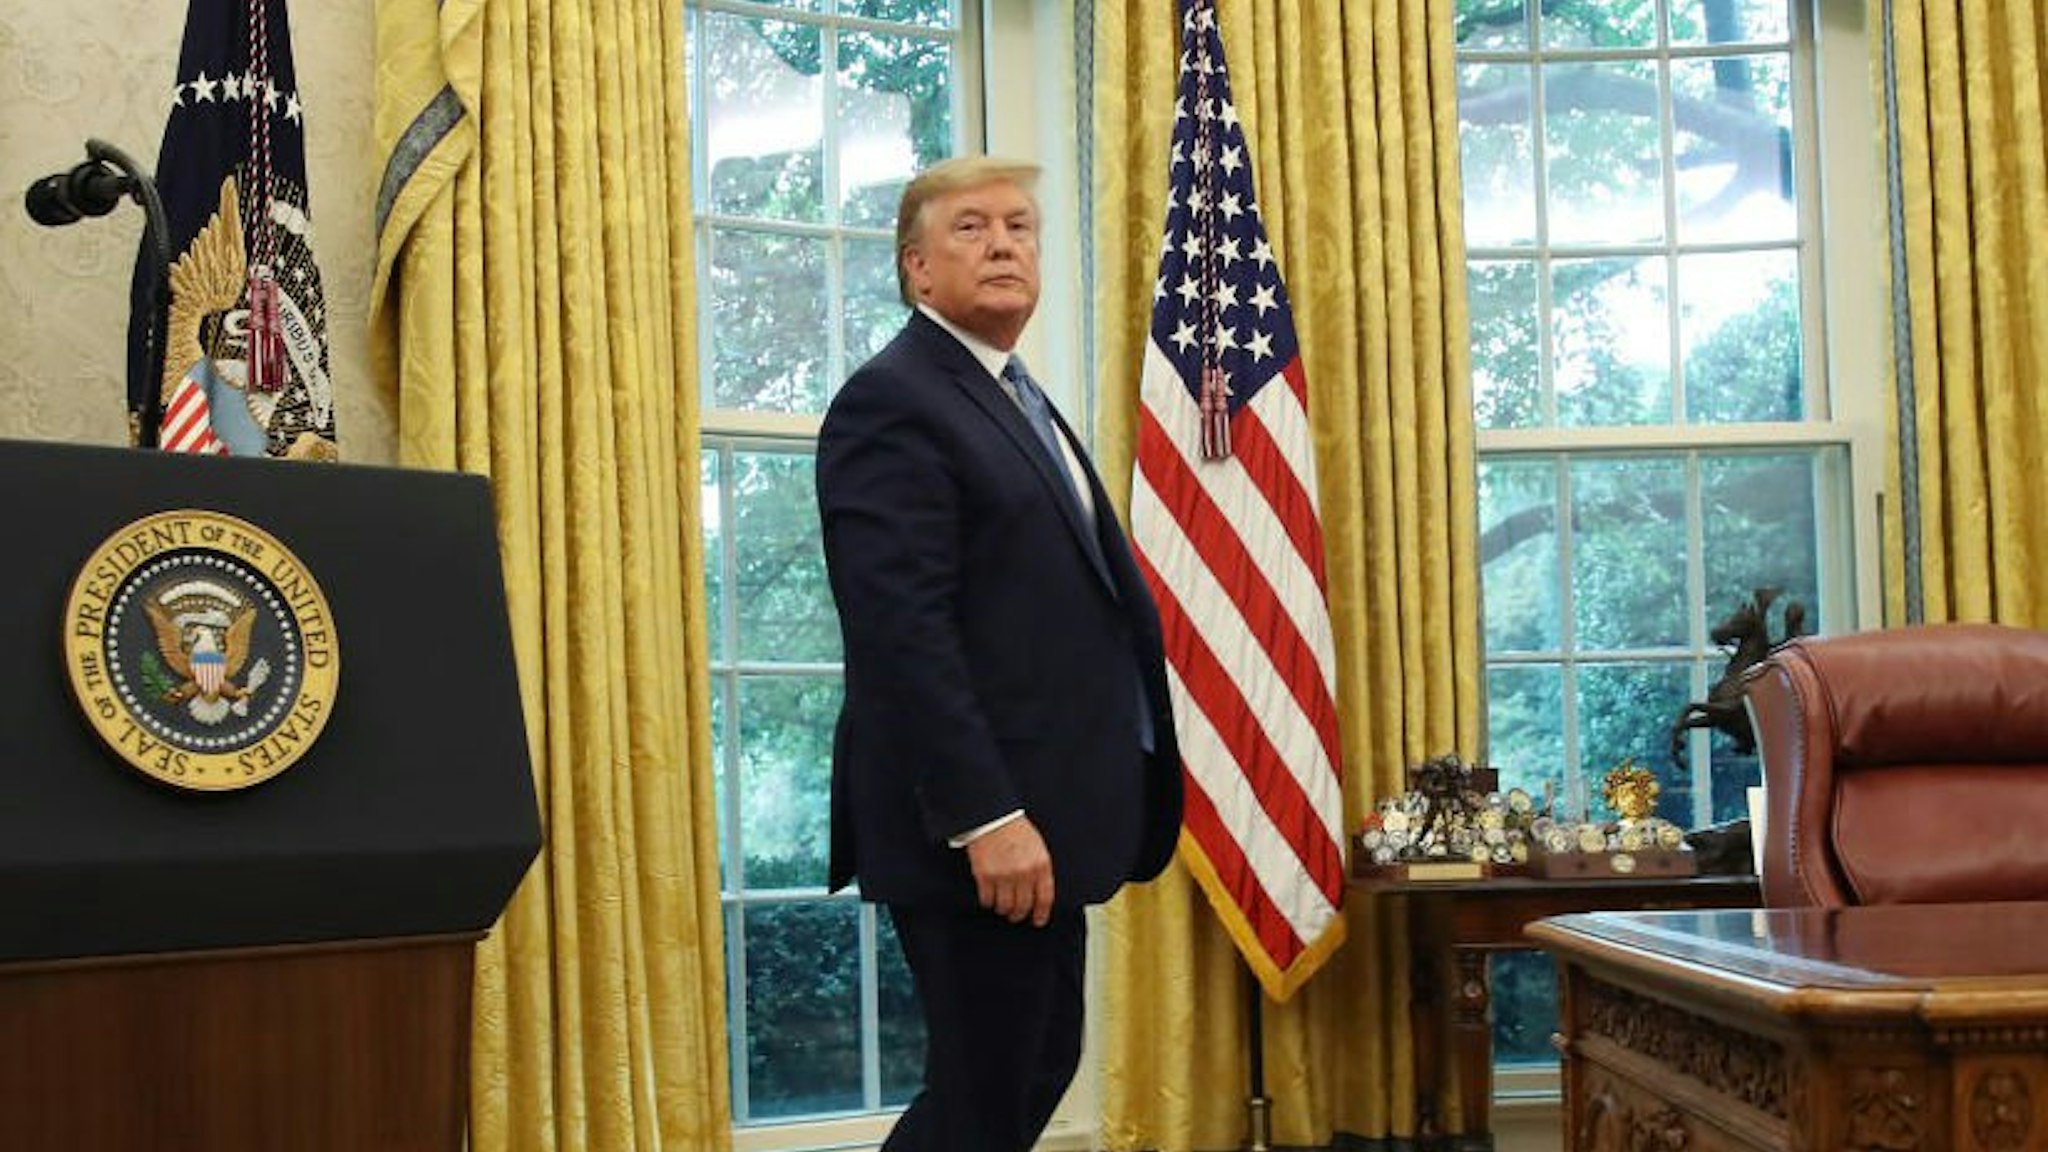 U.S. President Donald Trump walks away after presenting the Medal of Freedom to retired Boston Celtic Bob Cousy in the Oval Office at the White House on August 22, 2019 in Washington, DC.